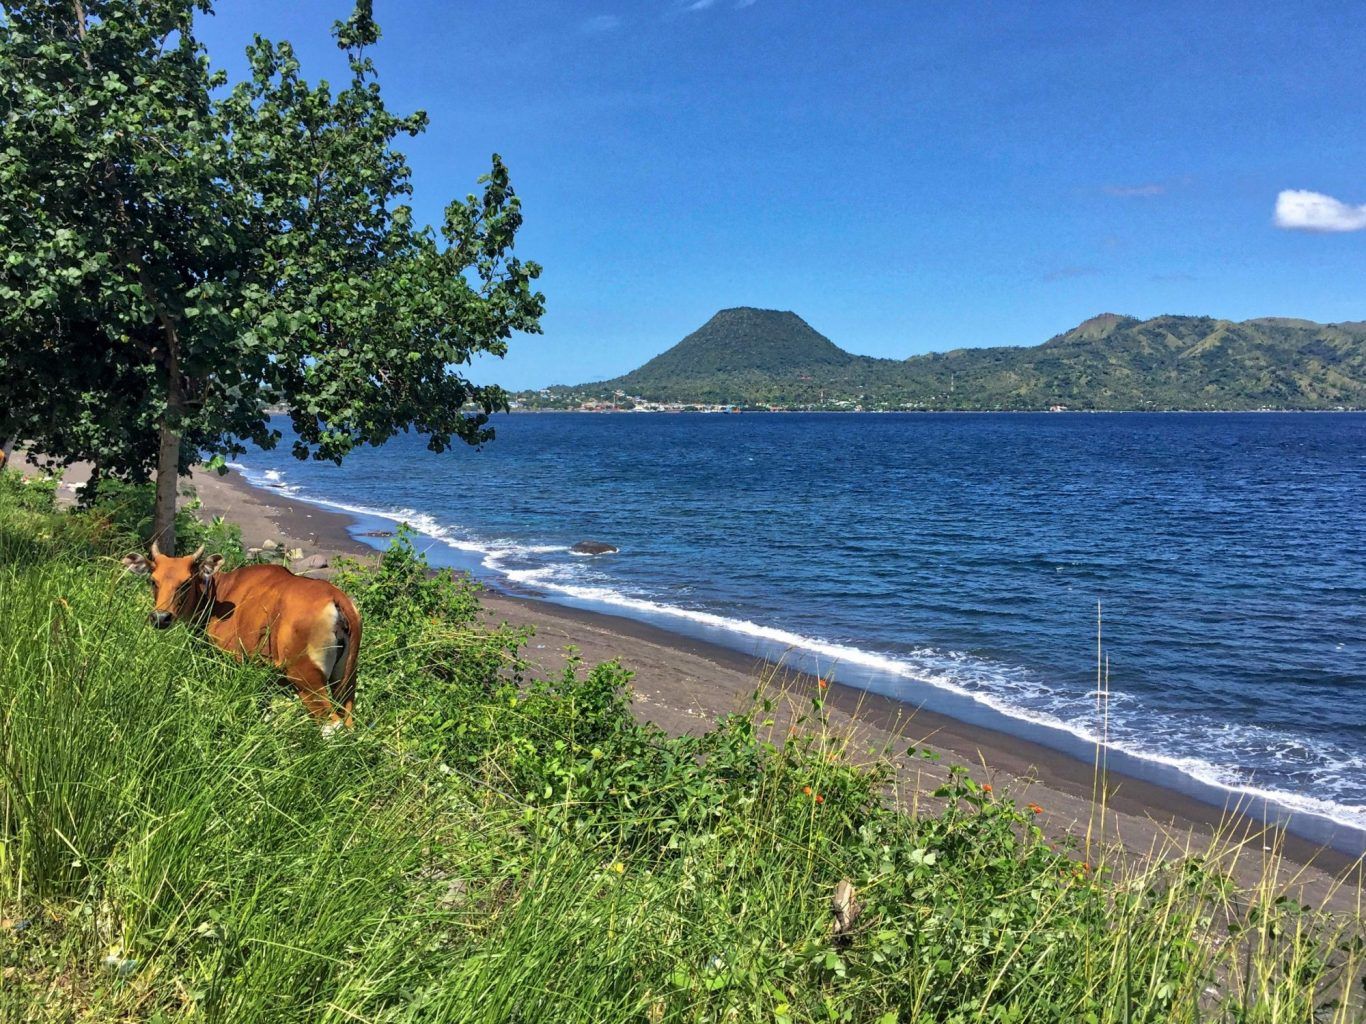 A cow grazes near a volcanic beach on the way to Bajawa, Flores Island, Indonesia